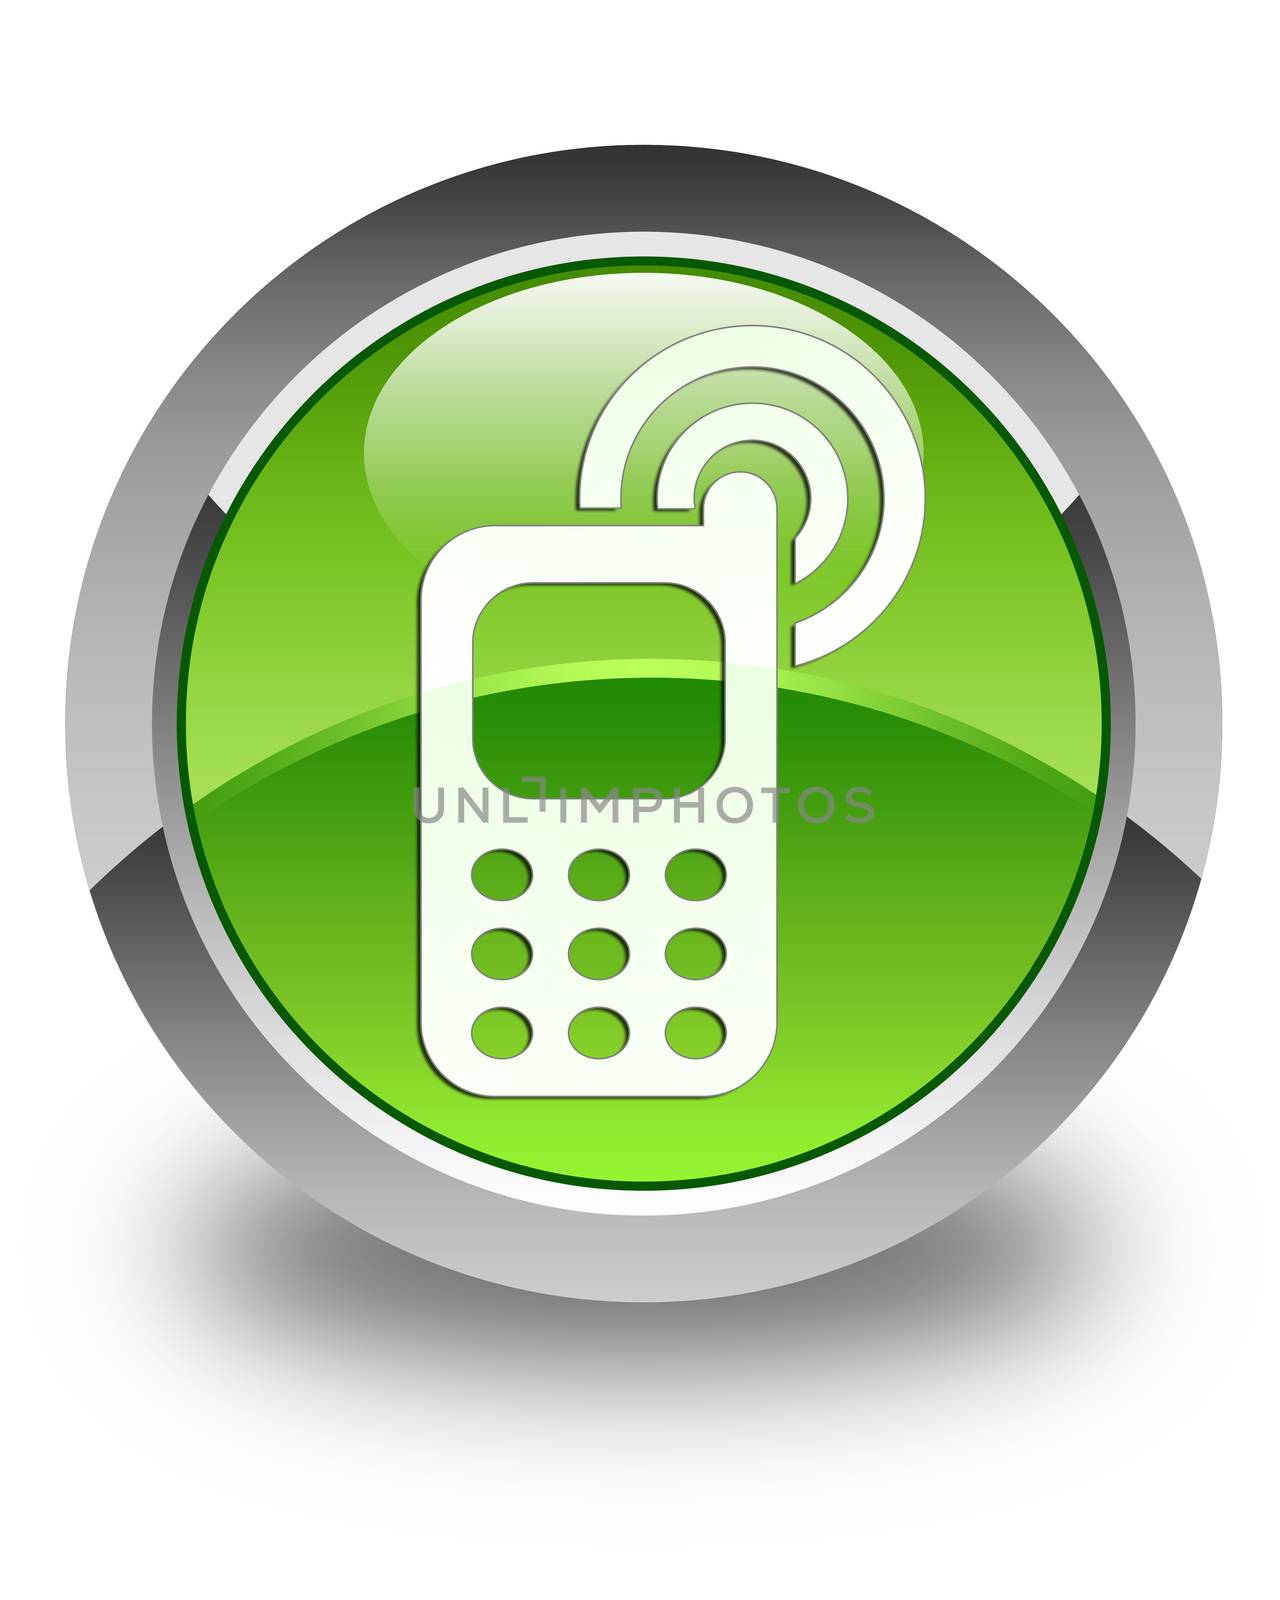 Cellphone ringing icon on glossy green round button